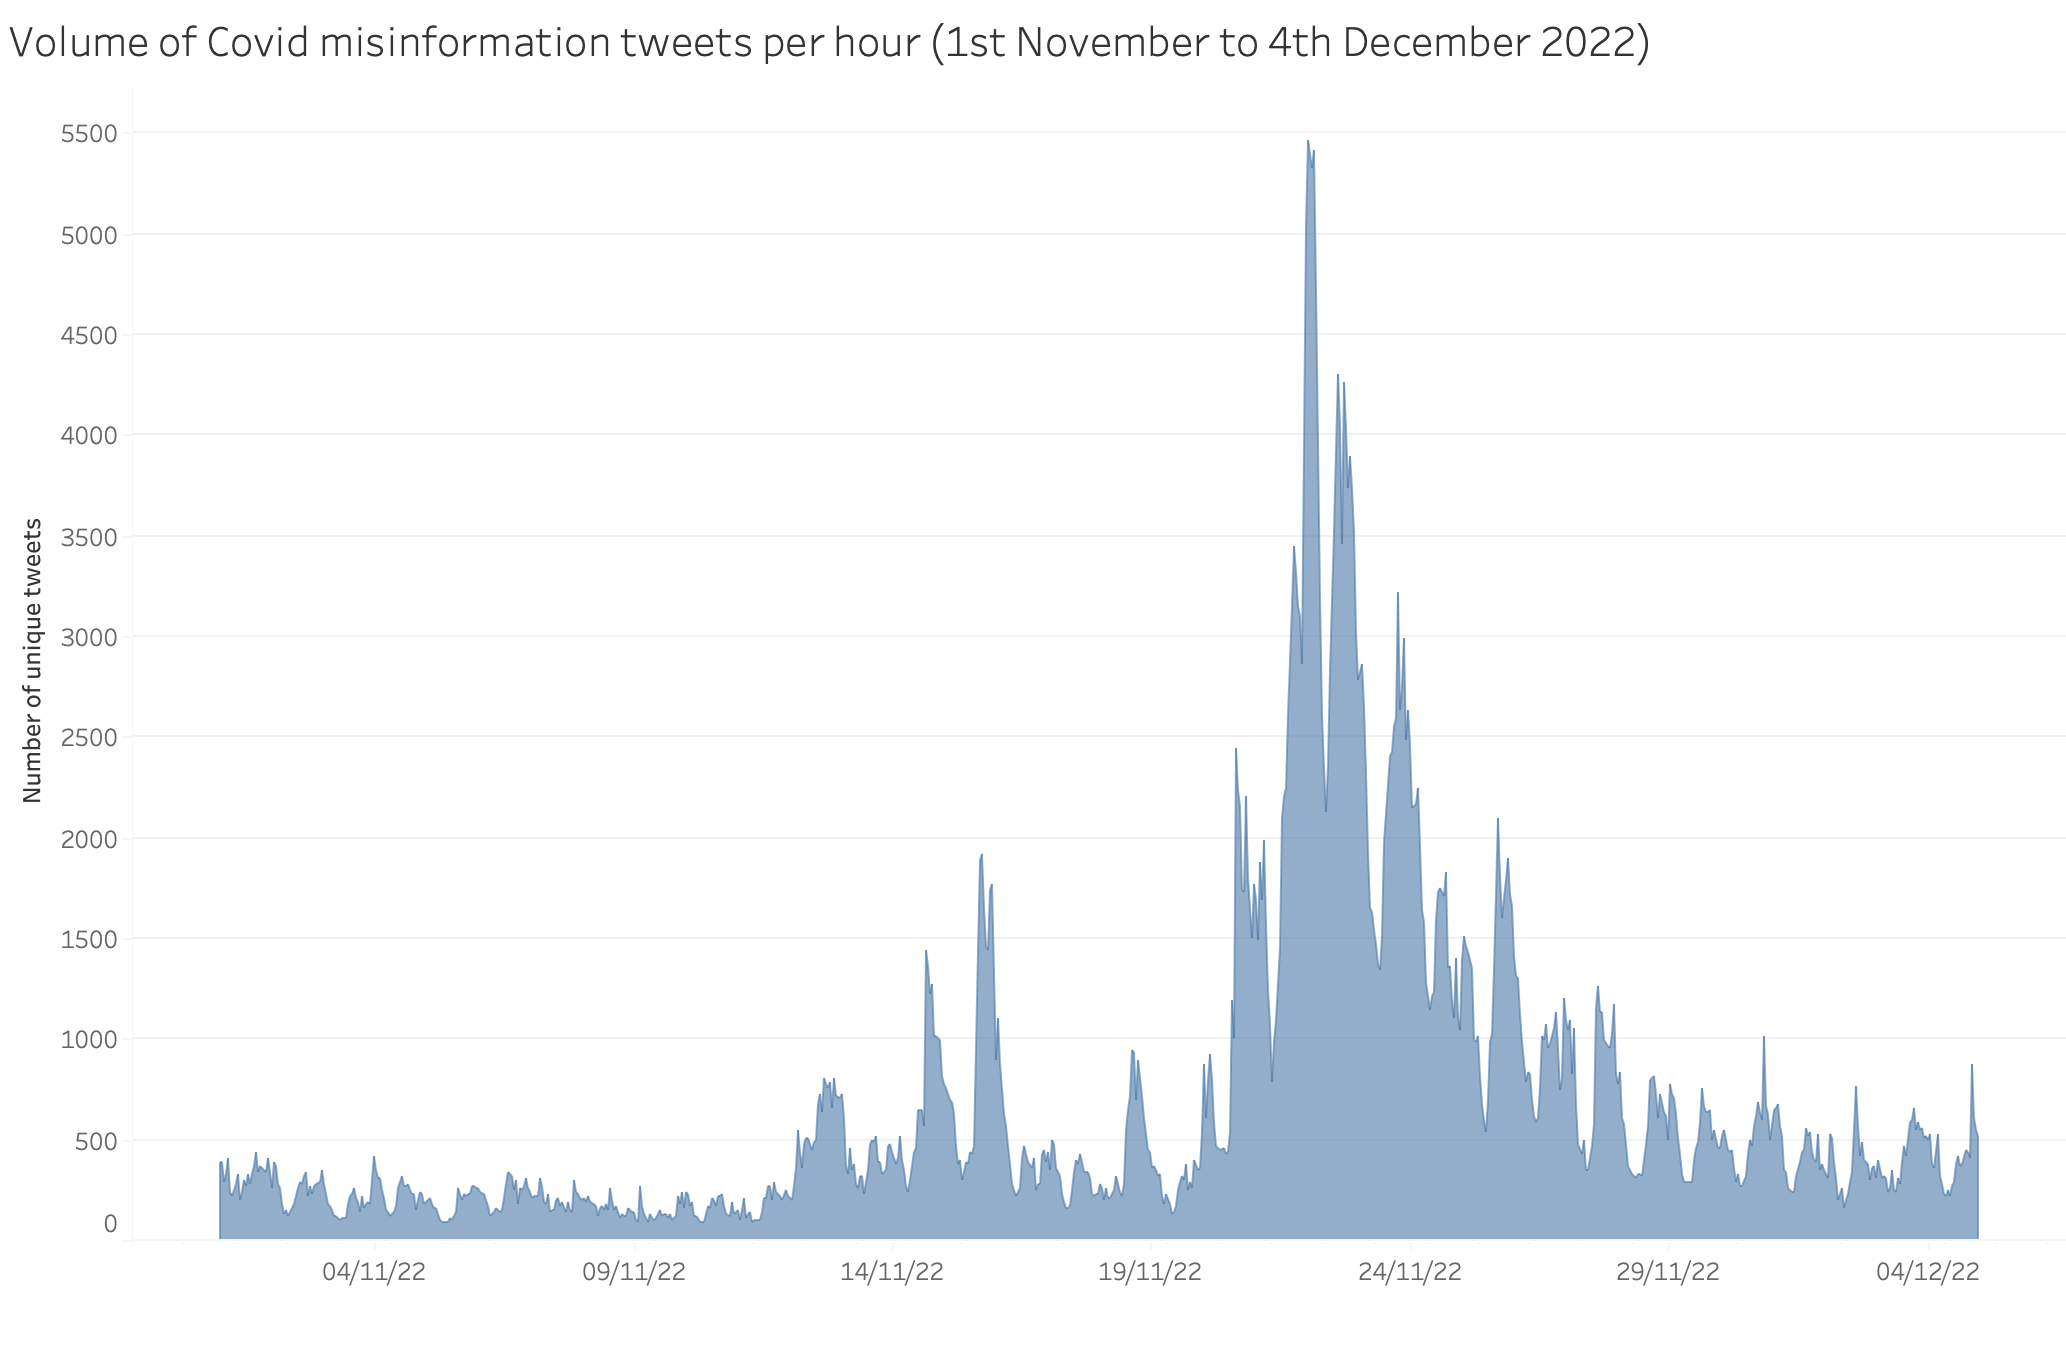 A graph showing a spike in COVID misinformation tweets from around mid-November